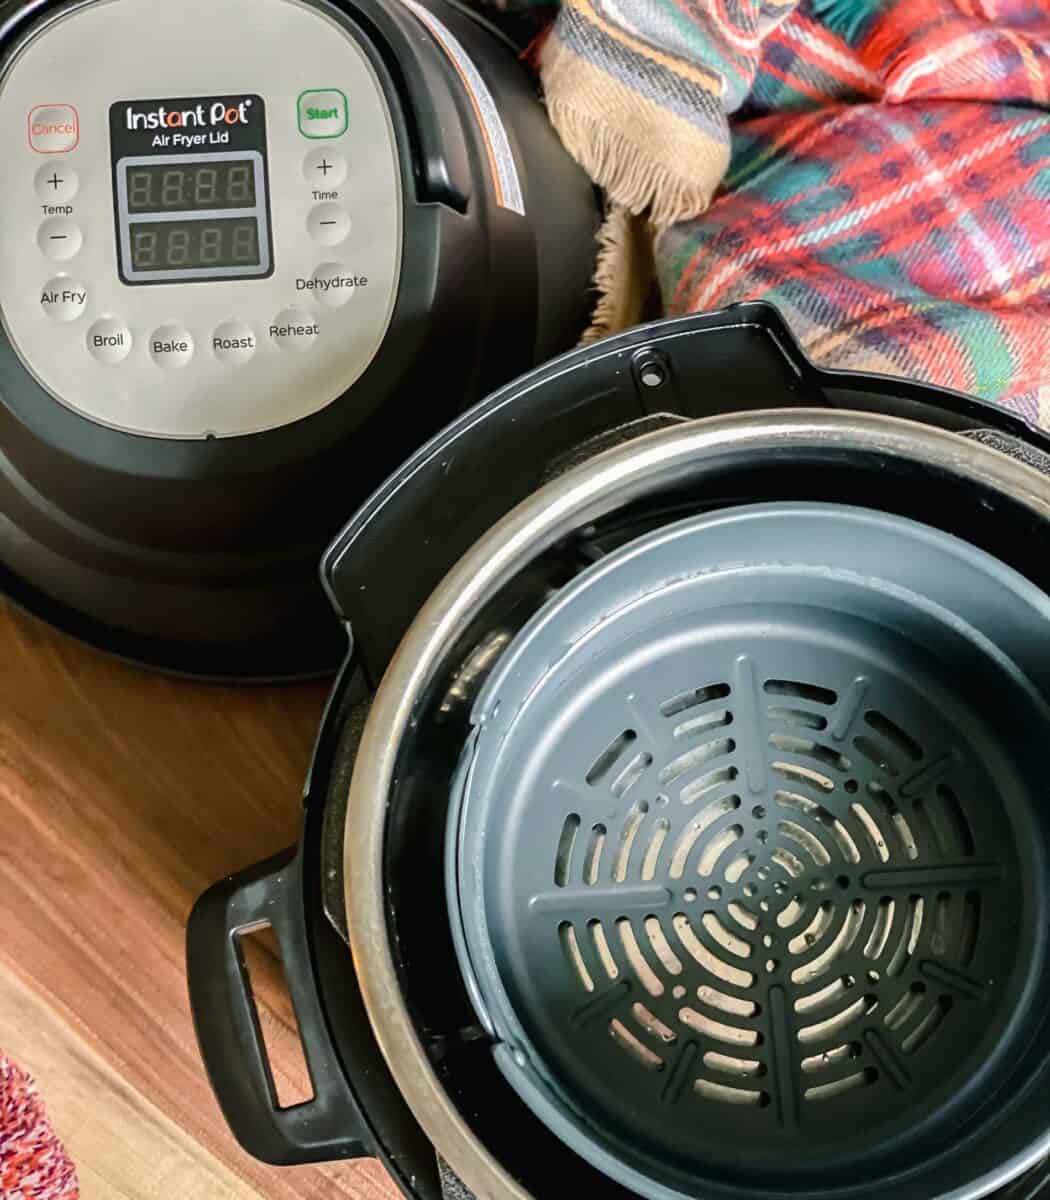 A comprehensive review of Instant Pot's newest accessory - the Instant Pot Air Fryer Lid!